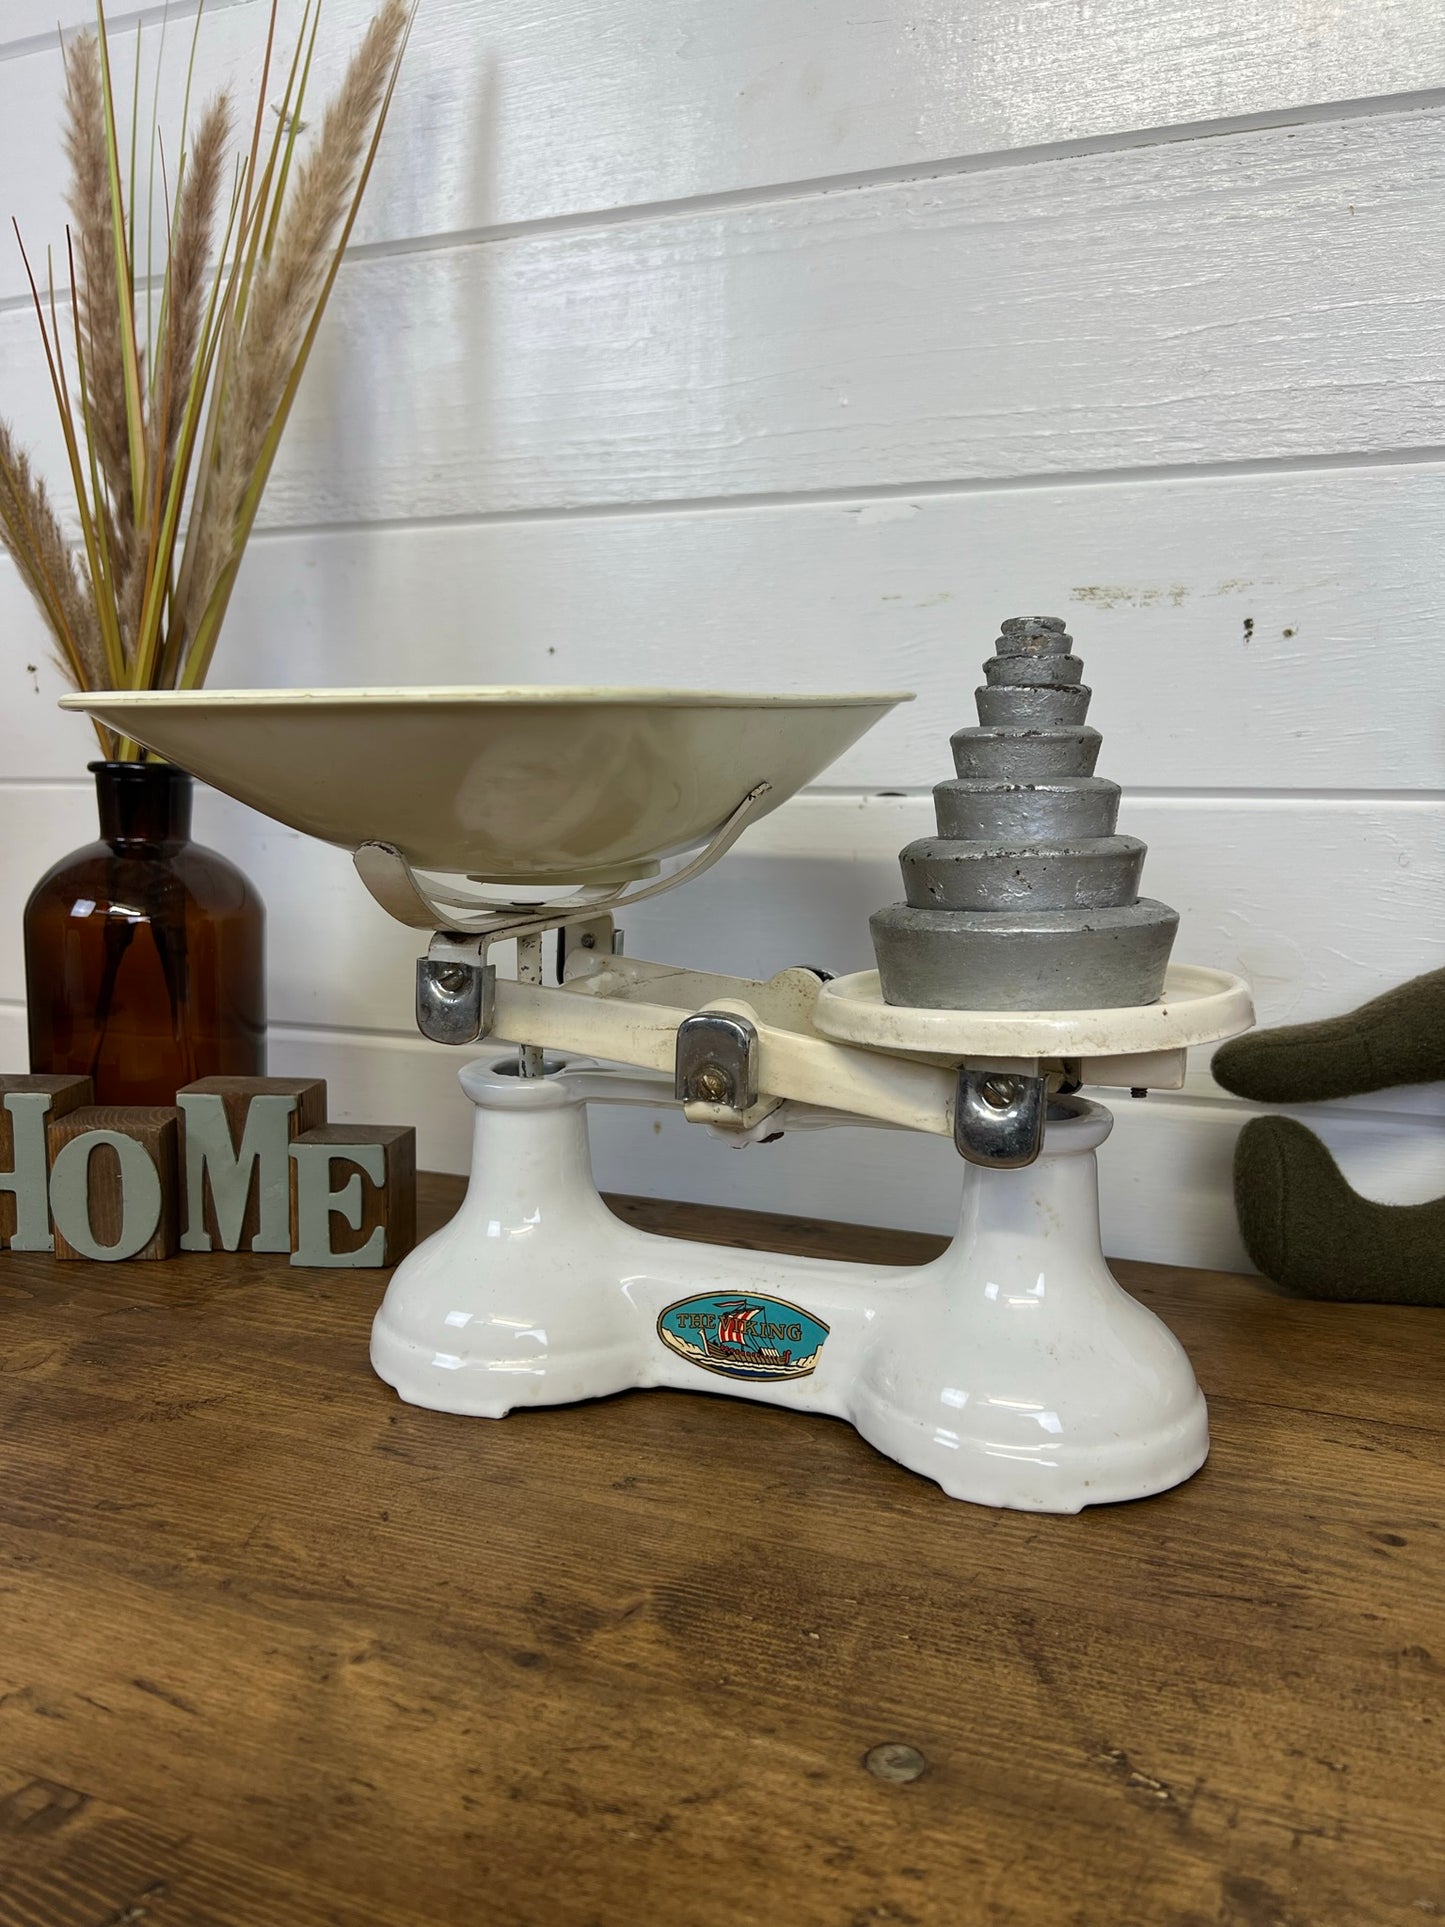 Vintage Cast Iron "The Viking" Kitchen Weighing Scales With Weights Vintage Farmhouse Kitchen